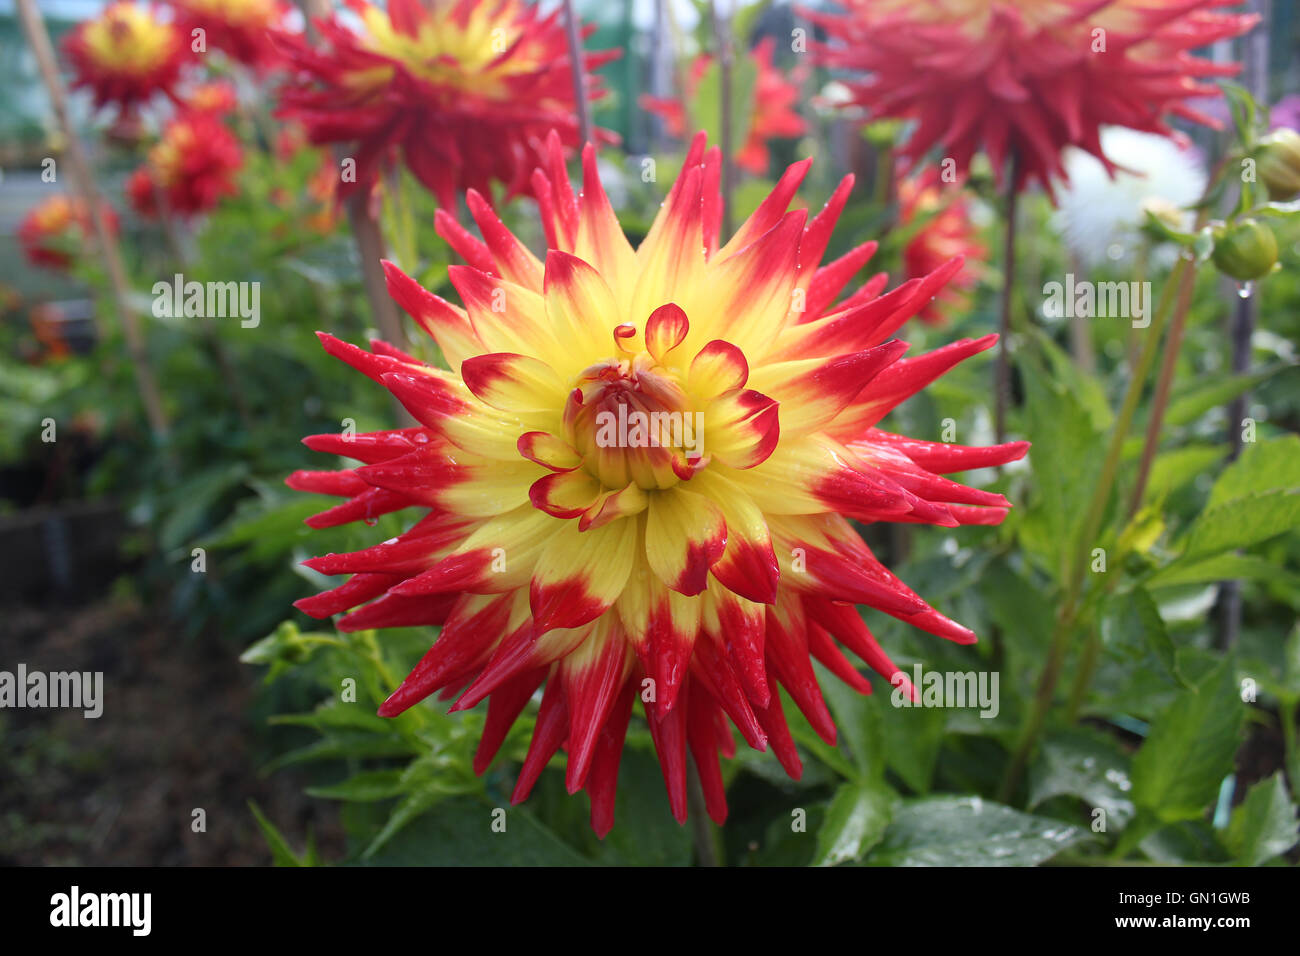 Vibrant red &yellow Dahlia with Dahlias in background with green leaves Stock Photo